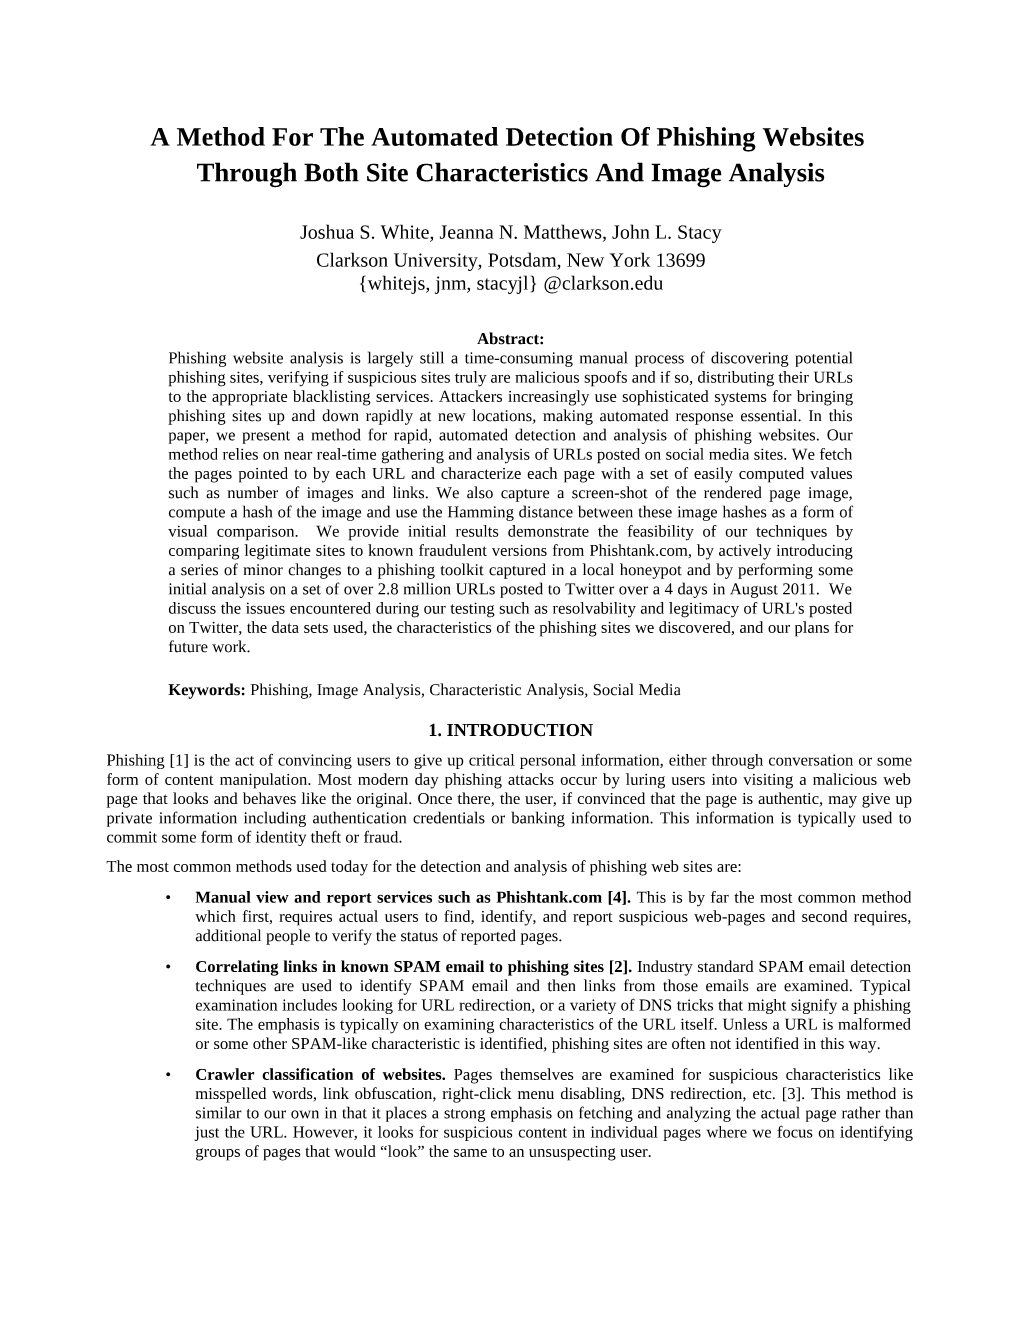 A Method for the Automated Detection of Phishing Websites Through Both Site Characteristics and Image Analysis